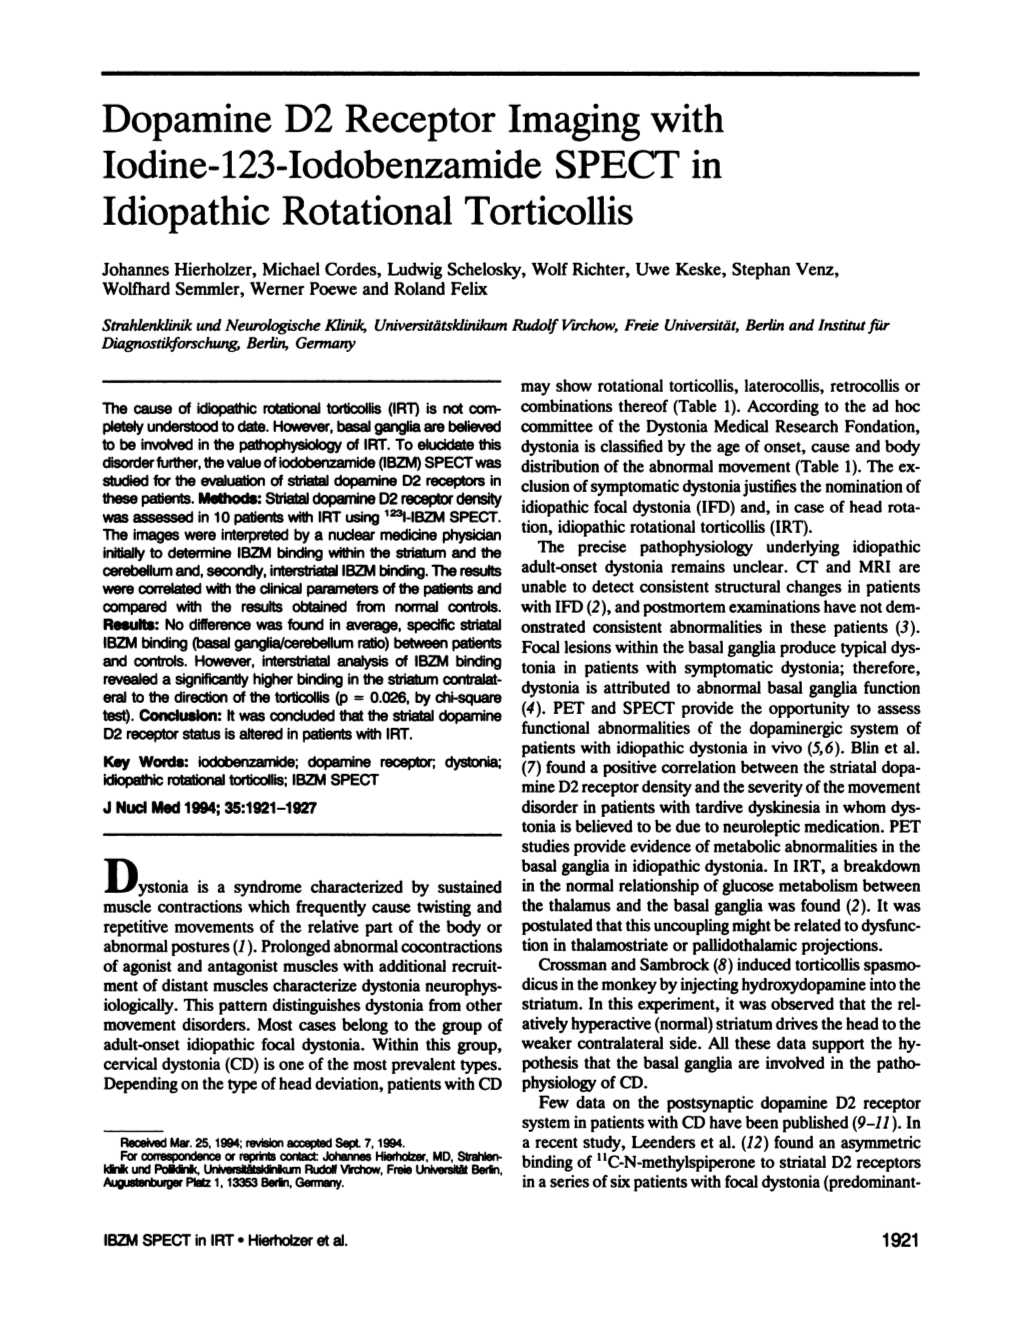 Dopamine D2 Receptor Imaging with Iodine-123-Iodobenzamide SPECT in Idiopathic Rotational Torticollis